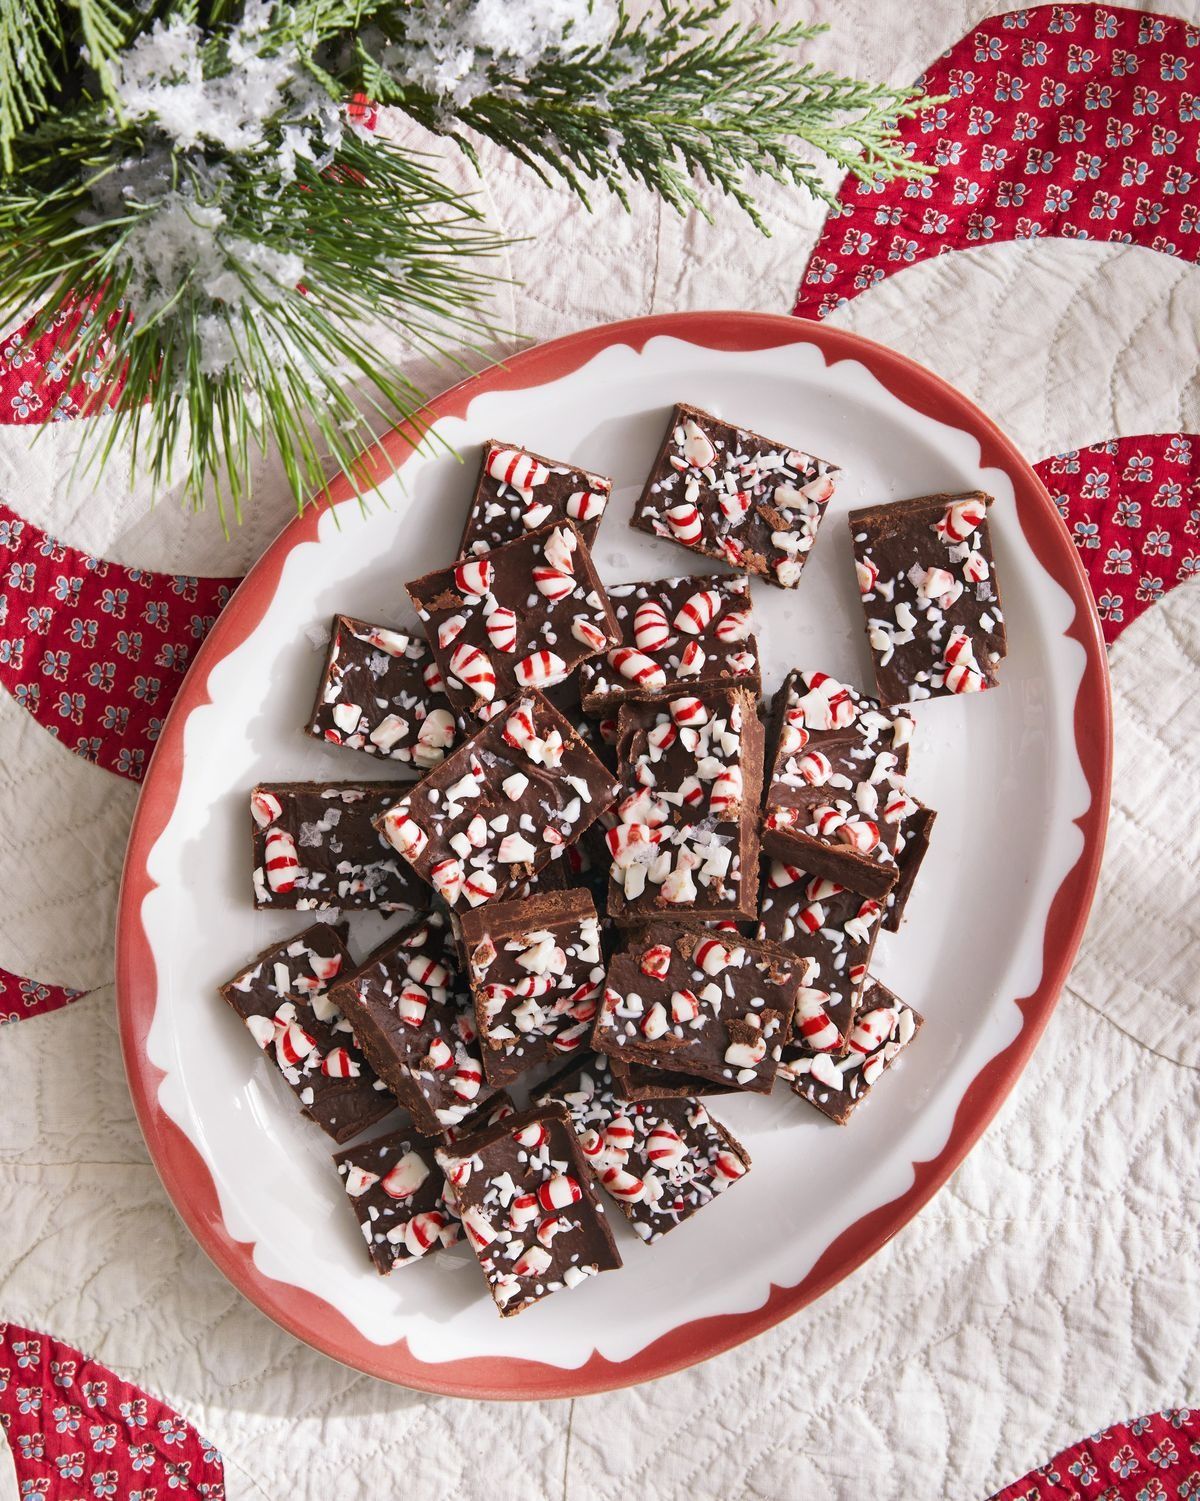 80 Best Christmas Desserts - Easy Recipes for Holiday Desserts